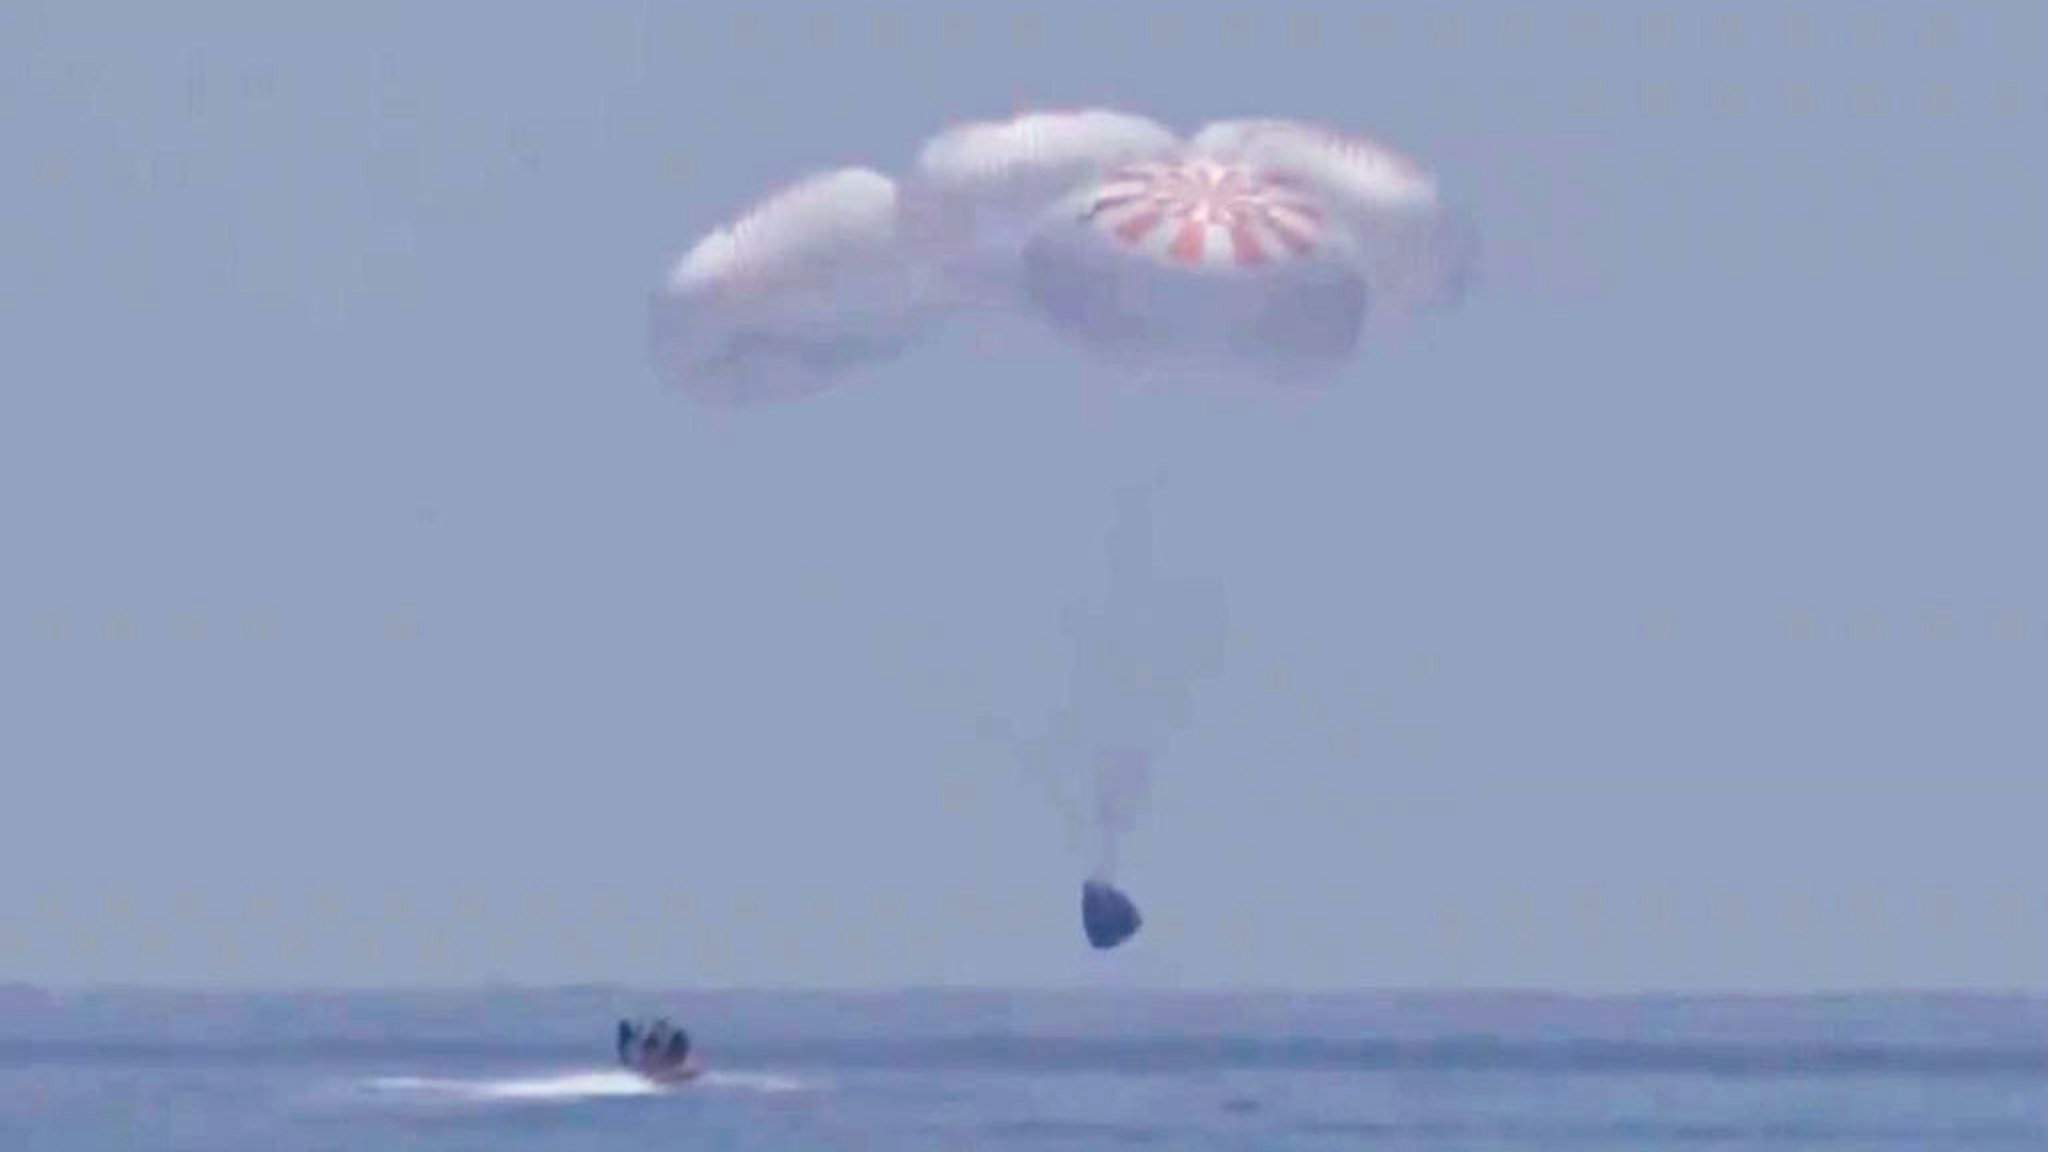 GULF OF MEXICO - AUGUST 2: In this screen grab from NASA TV, SpaceX 's Crew Dragon capsule spacecraft just before it splashes down in to the water after completing NASA's SpaceX Demo-2 mission to the International Space Station with NASA astronauts Robert Behnken and Douglas Hurley onboard, August 2, 2020 off the coast of Pensacola, Florida in the Gulf of Mexico. The Demo-2 mission is the first launch with astronauts of the SpaceX Crew Dragon spacecraft and Falcon 9 rocket to the International Space Station as part of the agency's Commercial Crew Program. The test flight serves as an end-to-end demonstration of SpaceXs crew transportation system. Behnken and Hurley launched at 3:22 p.m. EDT on Saturday, May 30, from Launch Complex 39A at the Kennedy Space Center. A new era of human spaceflight is set to begin as American astronauts once again launch on an American rocket from American soil to low-Earth orbit for the first time since the conclusion of the Space Shuttle Program in 2011